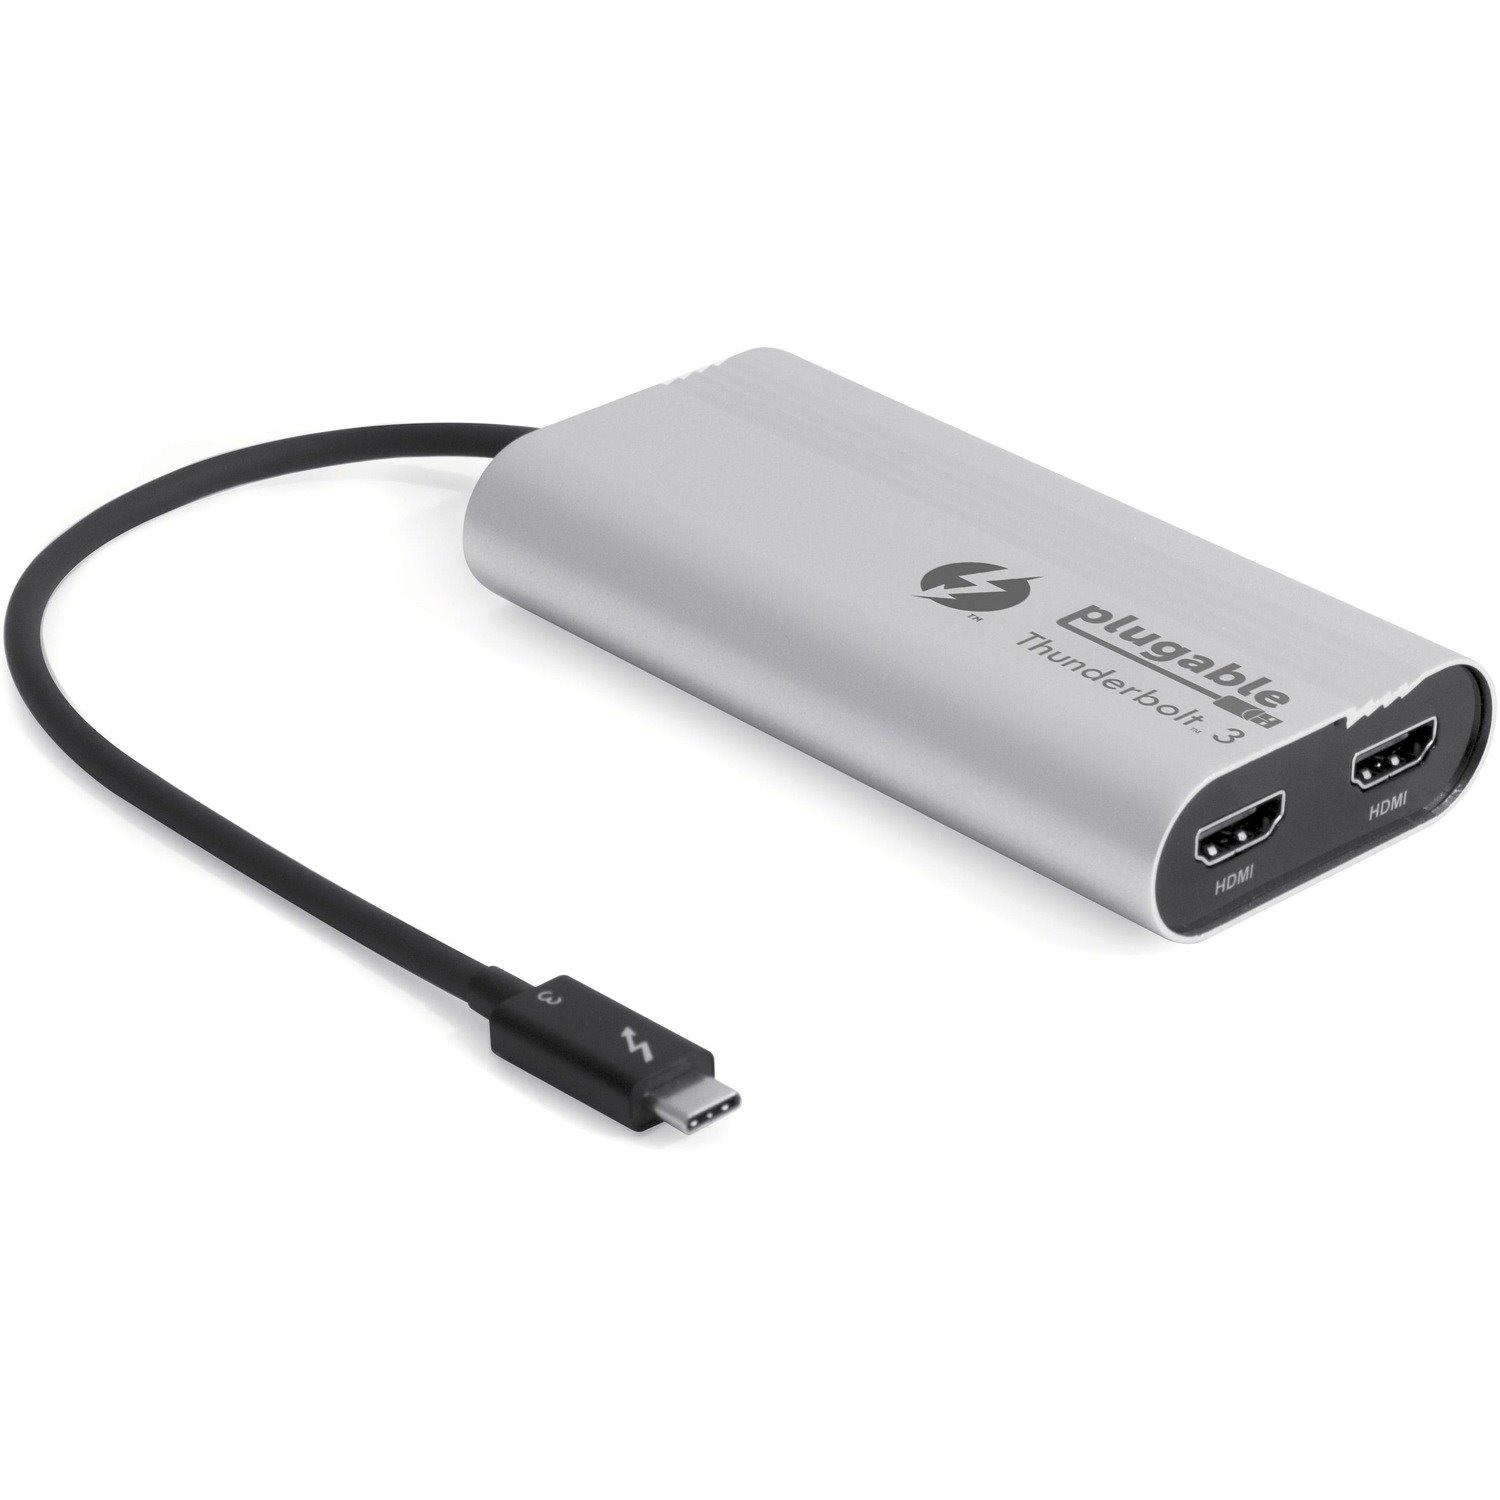 Plugable Thunderbolt 3 to Dual HDMI 2.0 Display Adapter for MacBook Pro Systems (201920182017), and Dell XPS